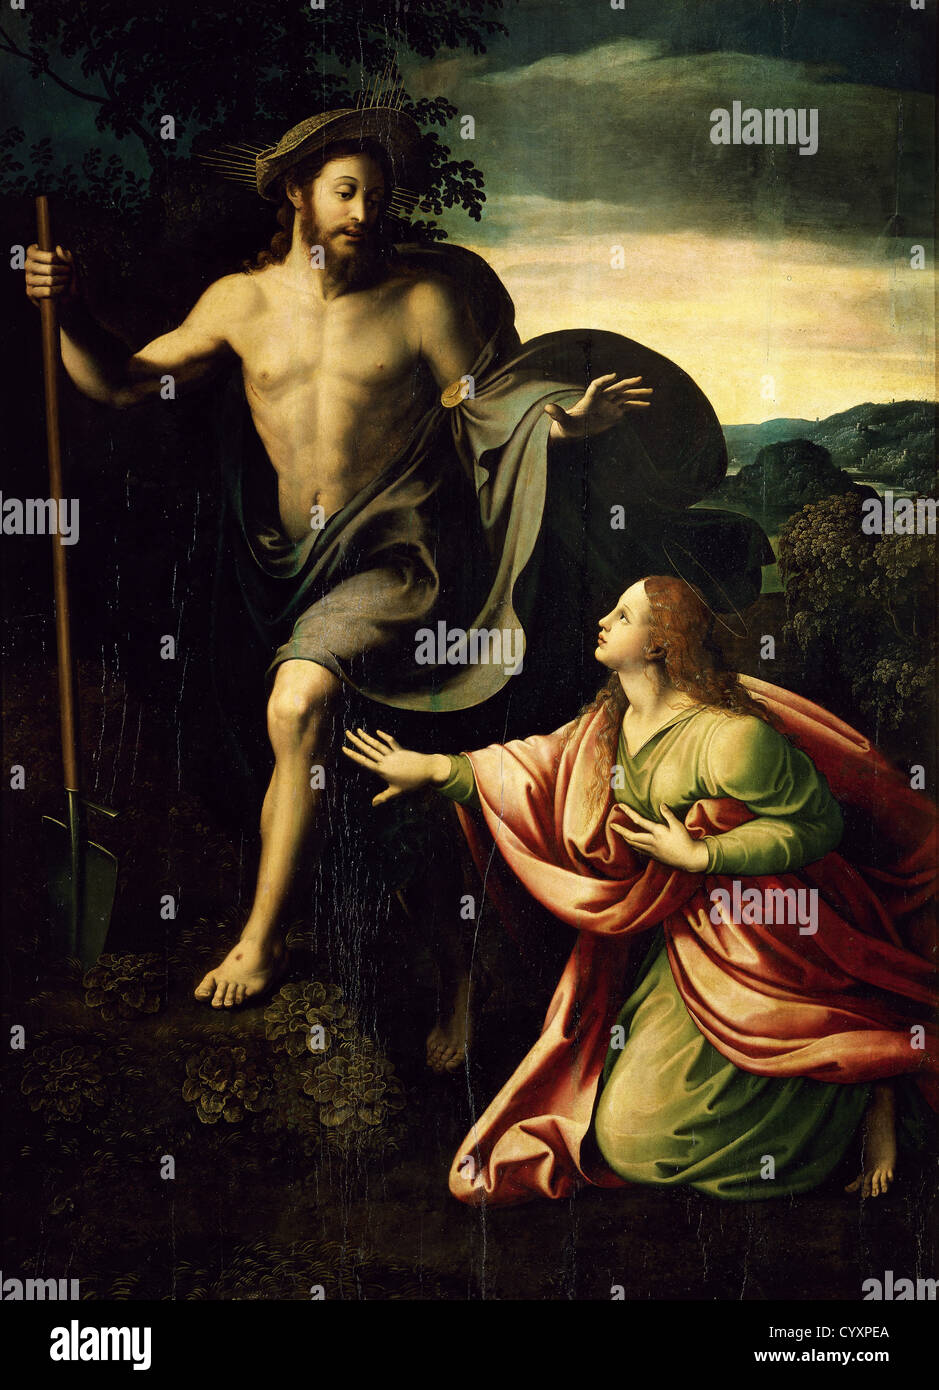 Giulio Romano (1499-1546). Noli me tangere. Christ appears to Saint Mary Magdalen after the resurrectIon. Mannerism. Stock Photo